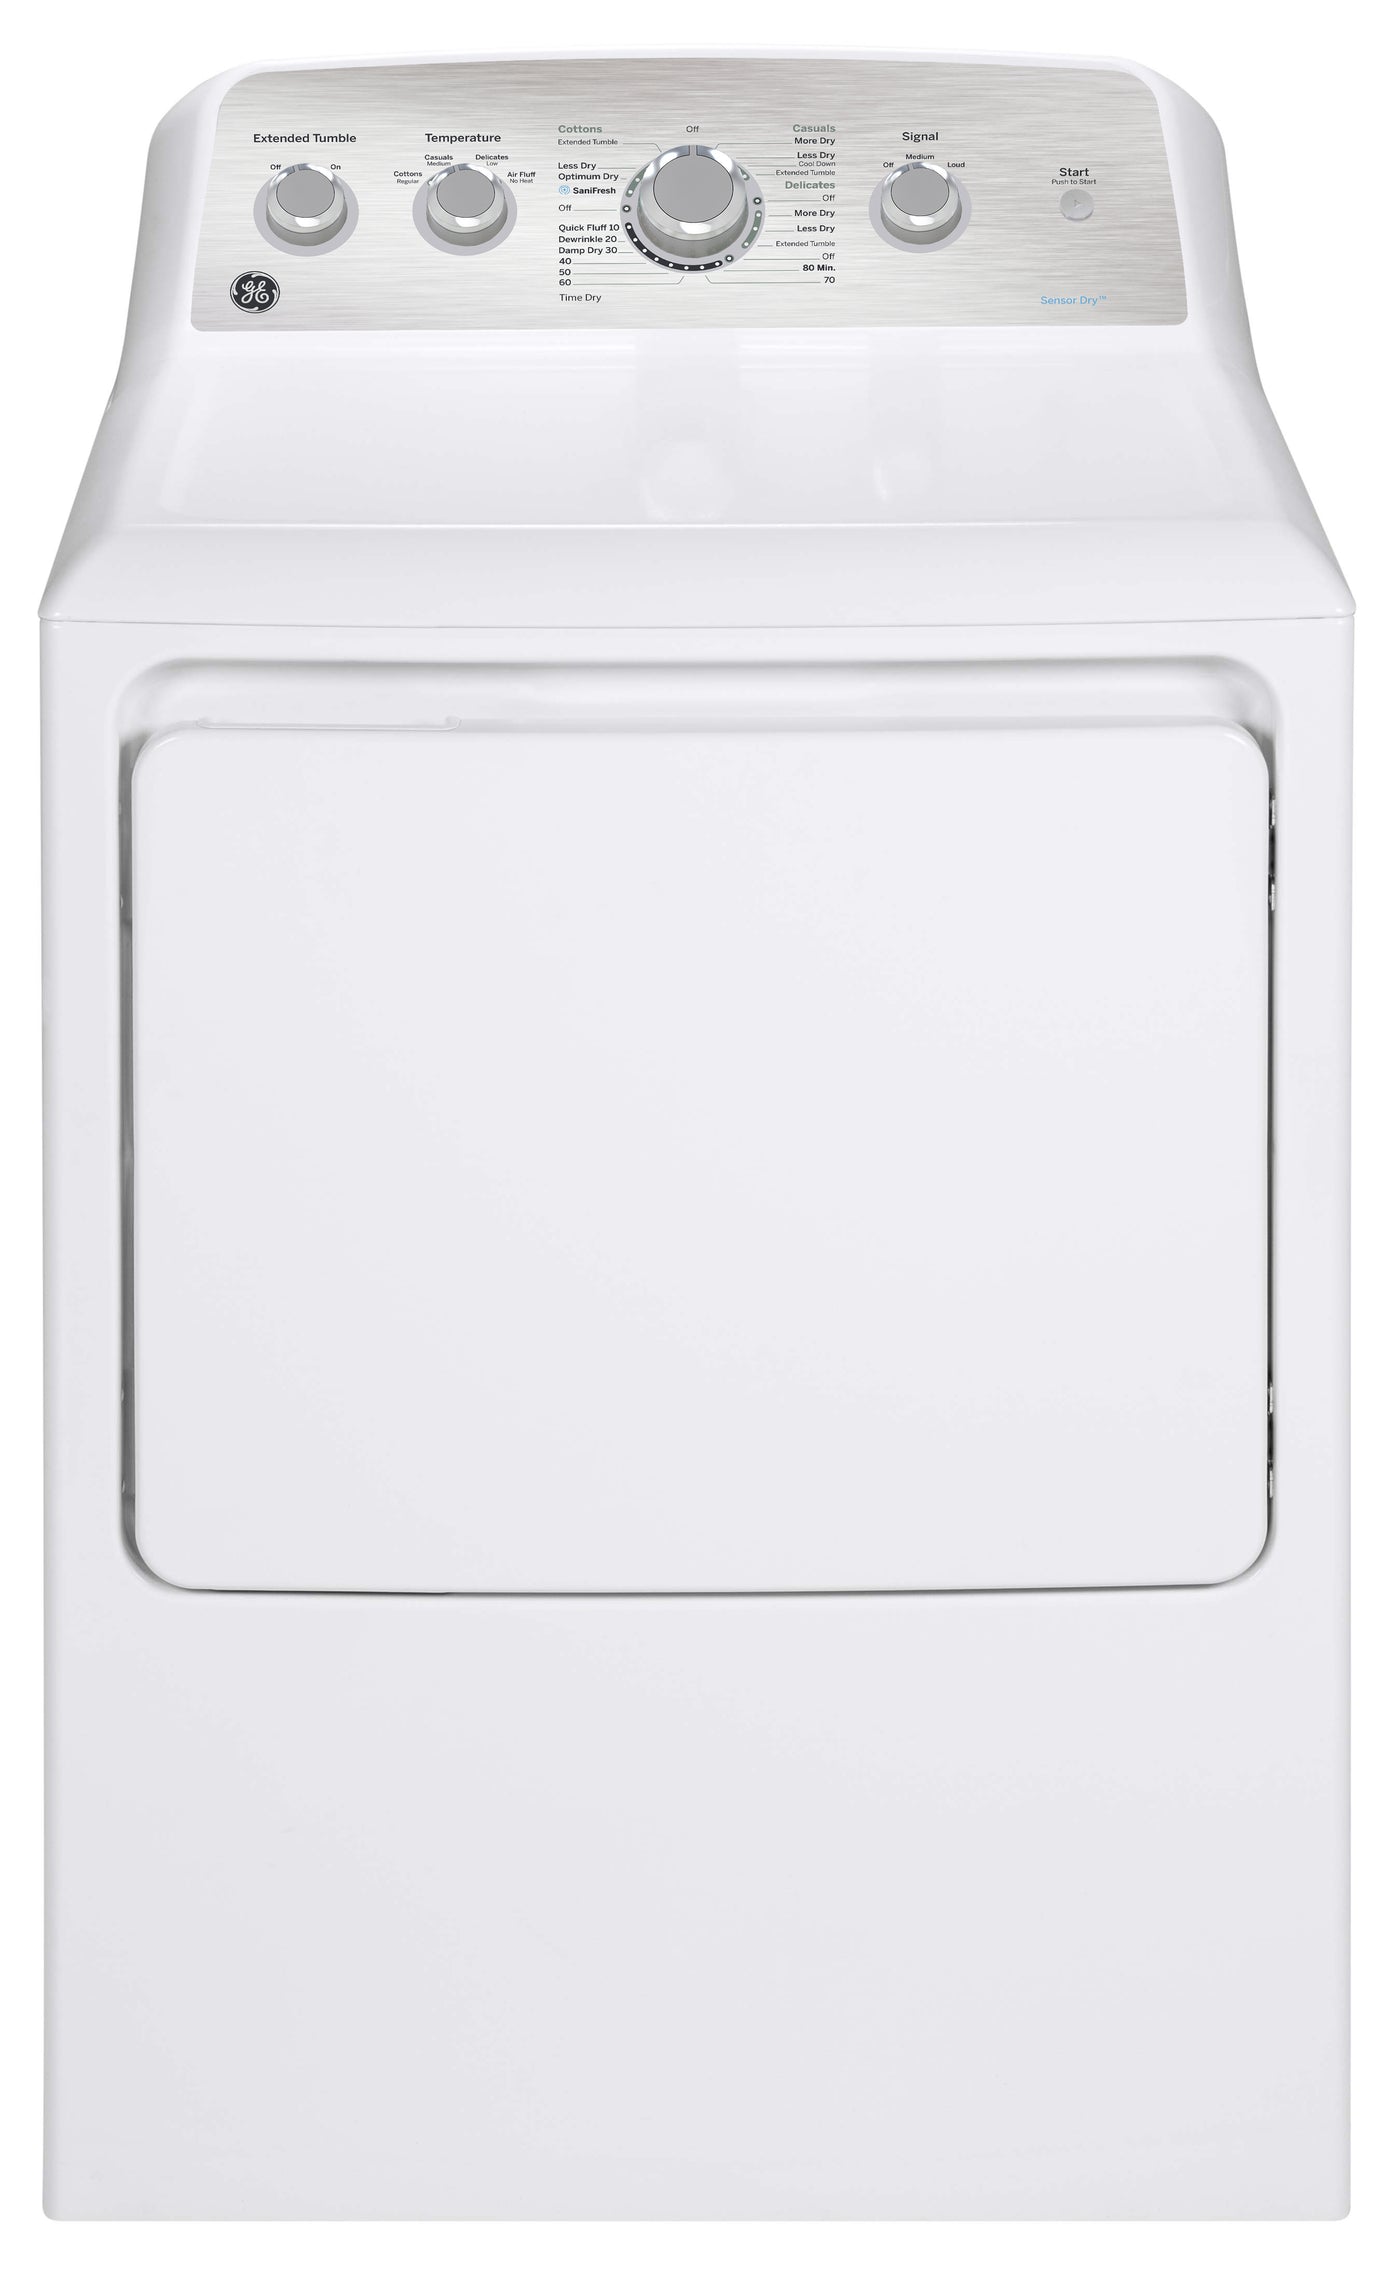 GE White Gas Dryer with SaniFresh Cycle (7.2 Cu. Ft.) - GTD45GBMRWS